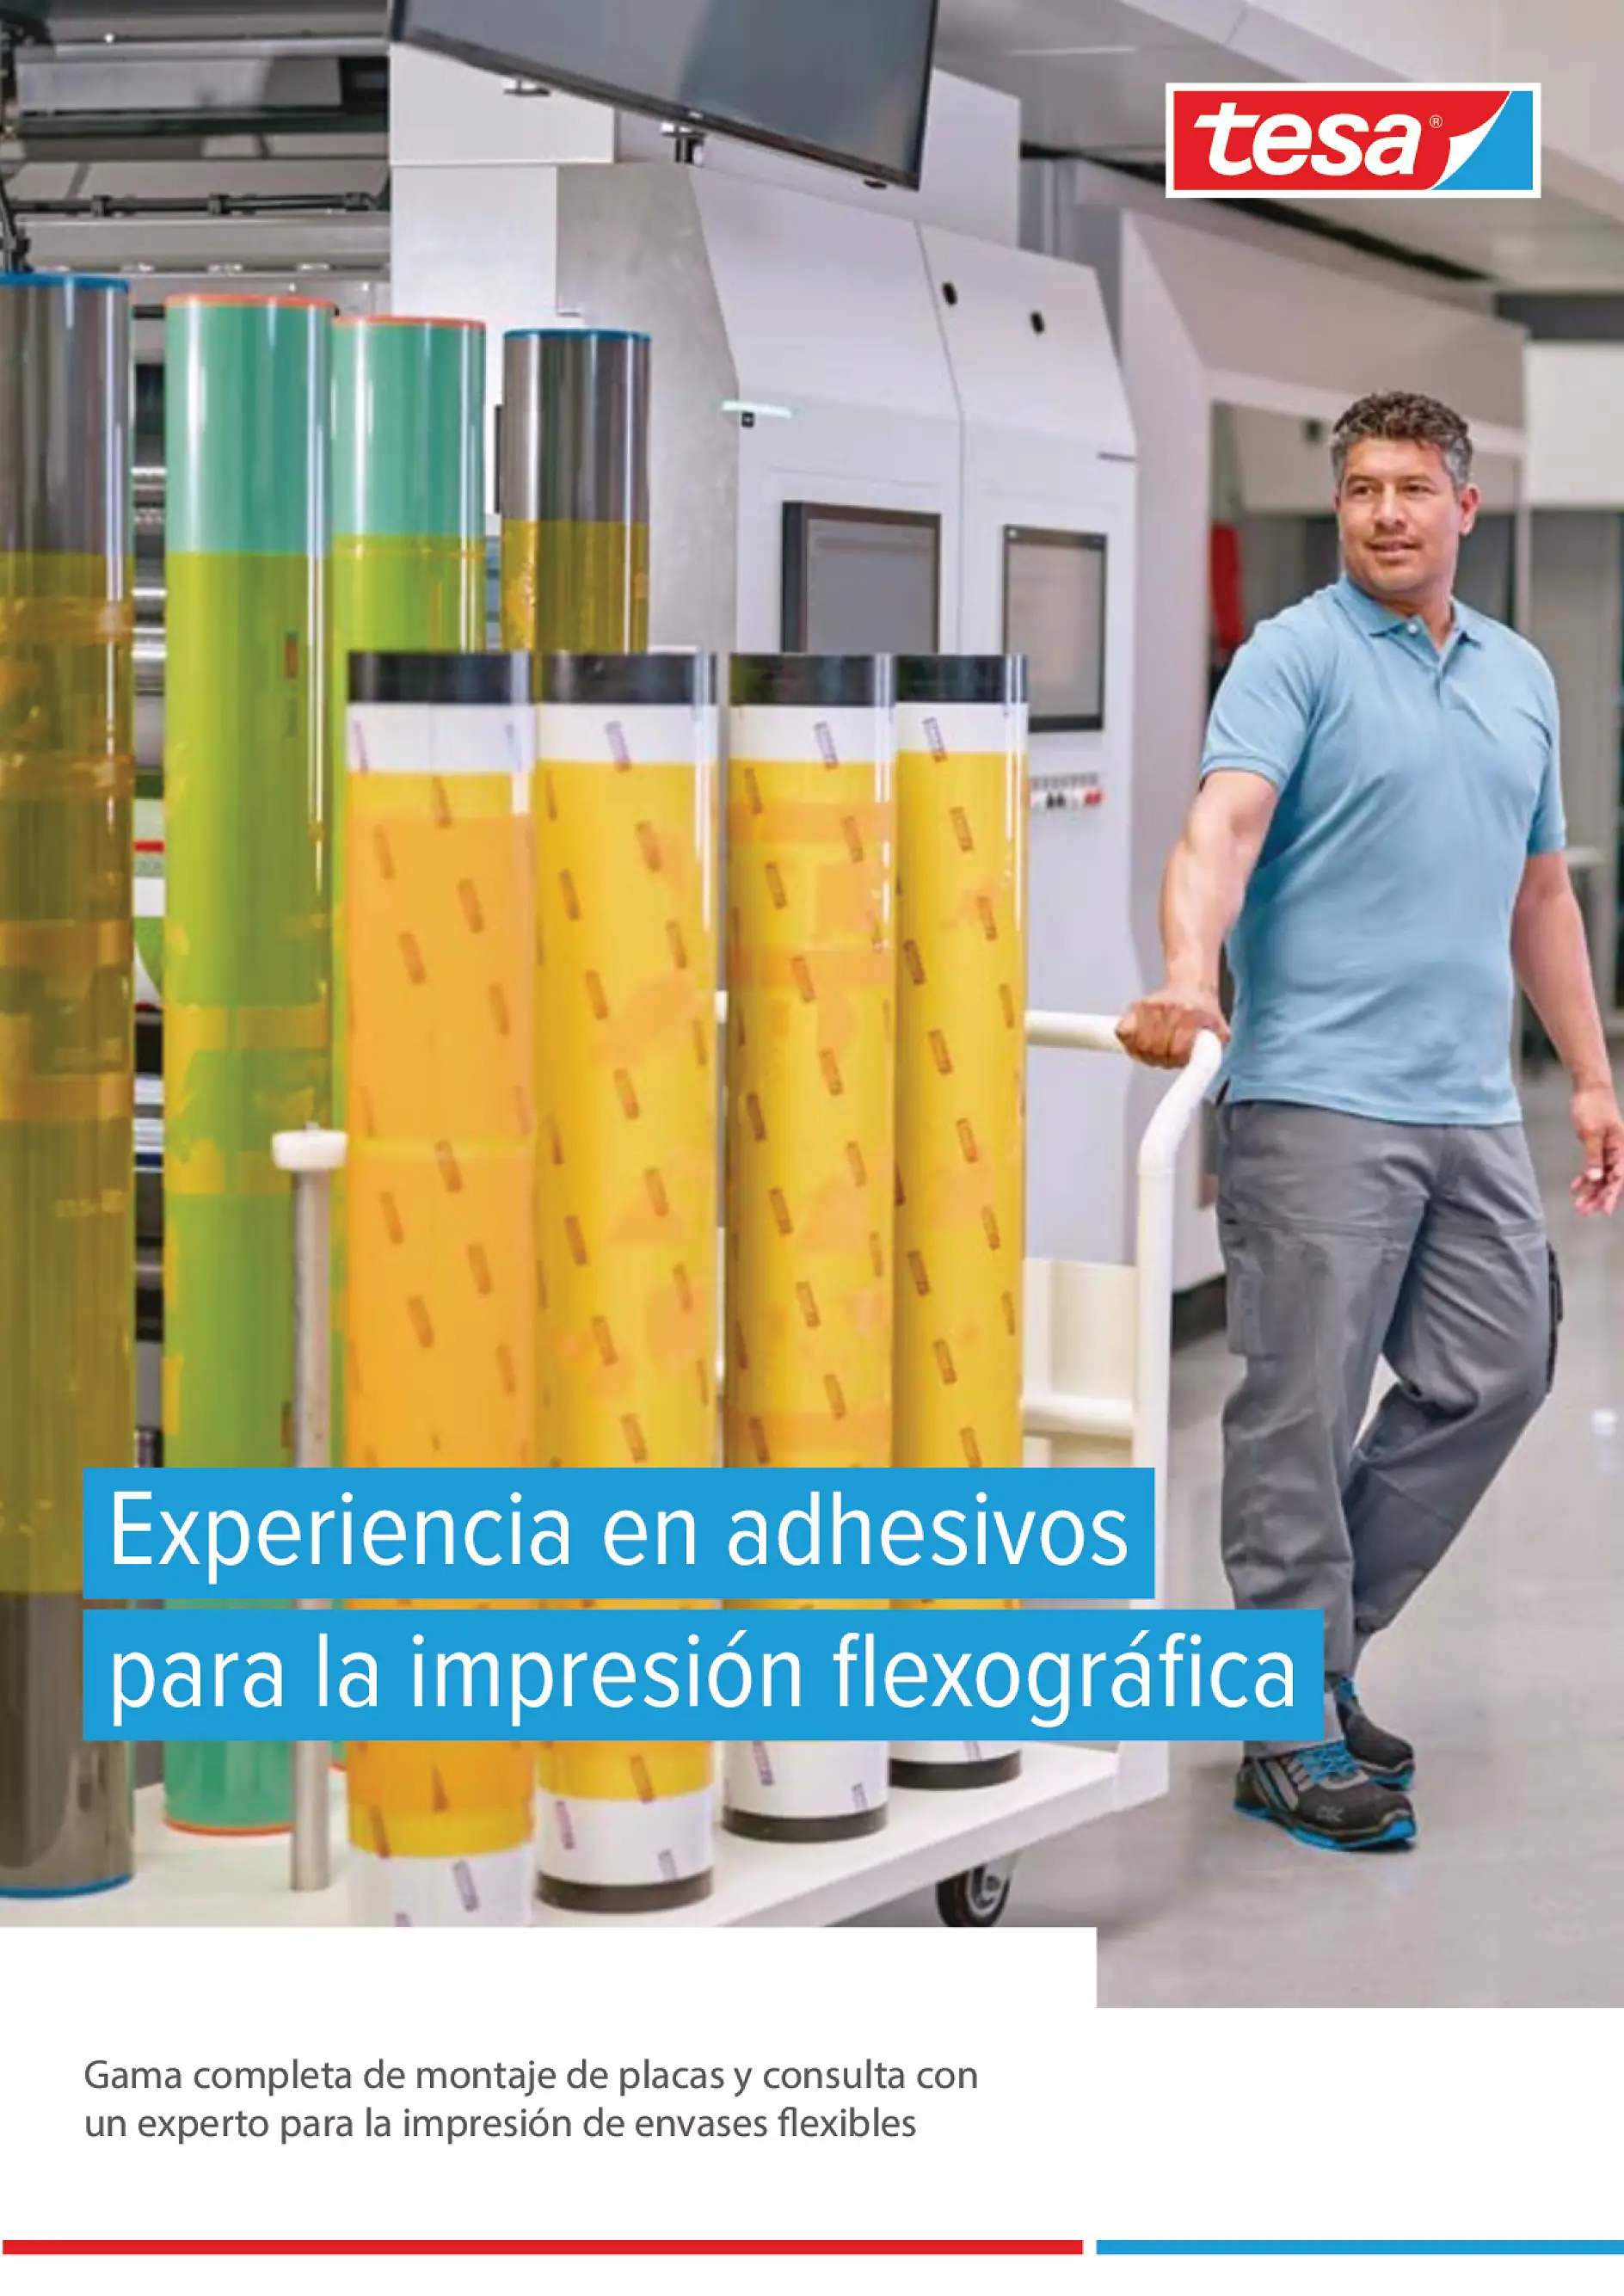 Adhesive Expertise for Flexographic Printing_ES